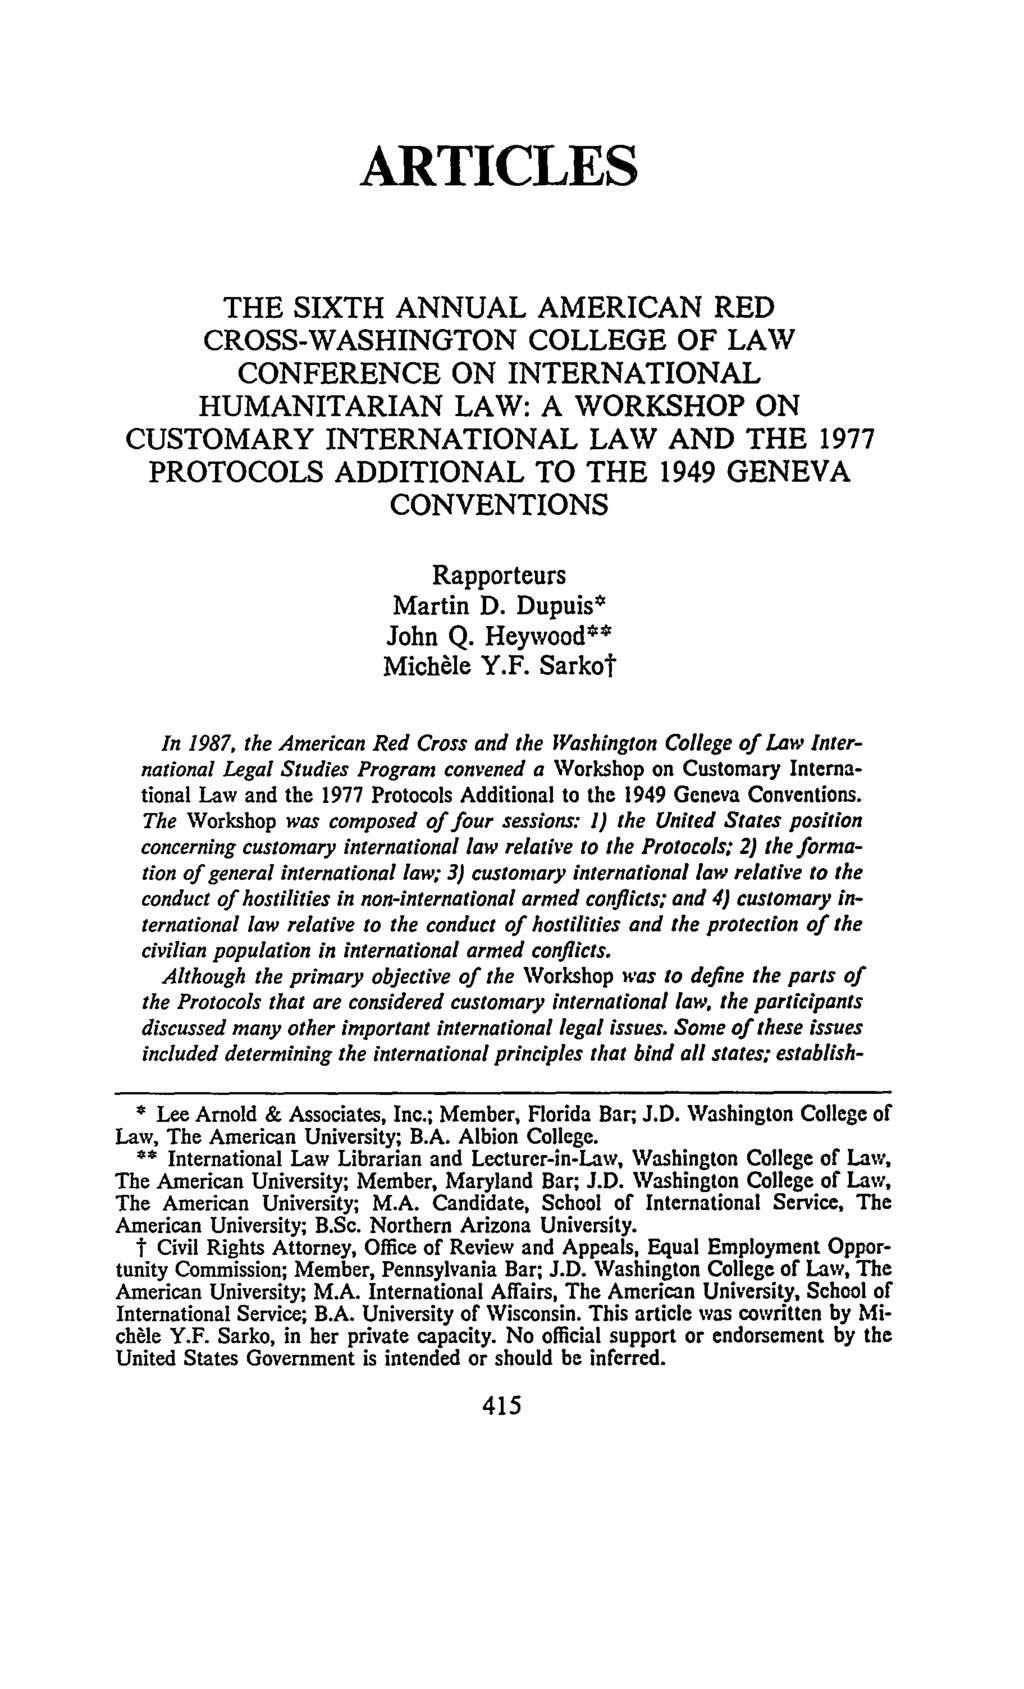 ARTICLES THE SIXTH ANNUAL AMERICAN RED CROSS-WASHINGTON COLLEGE OF LAW CONFERENCE ON INTERNATIONAL HUMANITARIAN LAW: A WORKSHOP ON CUSTOMARY INTERNATIONAL LAW AND THE 1977 PROTOCOLS ADDITIONAL TO THE